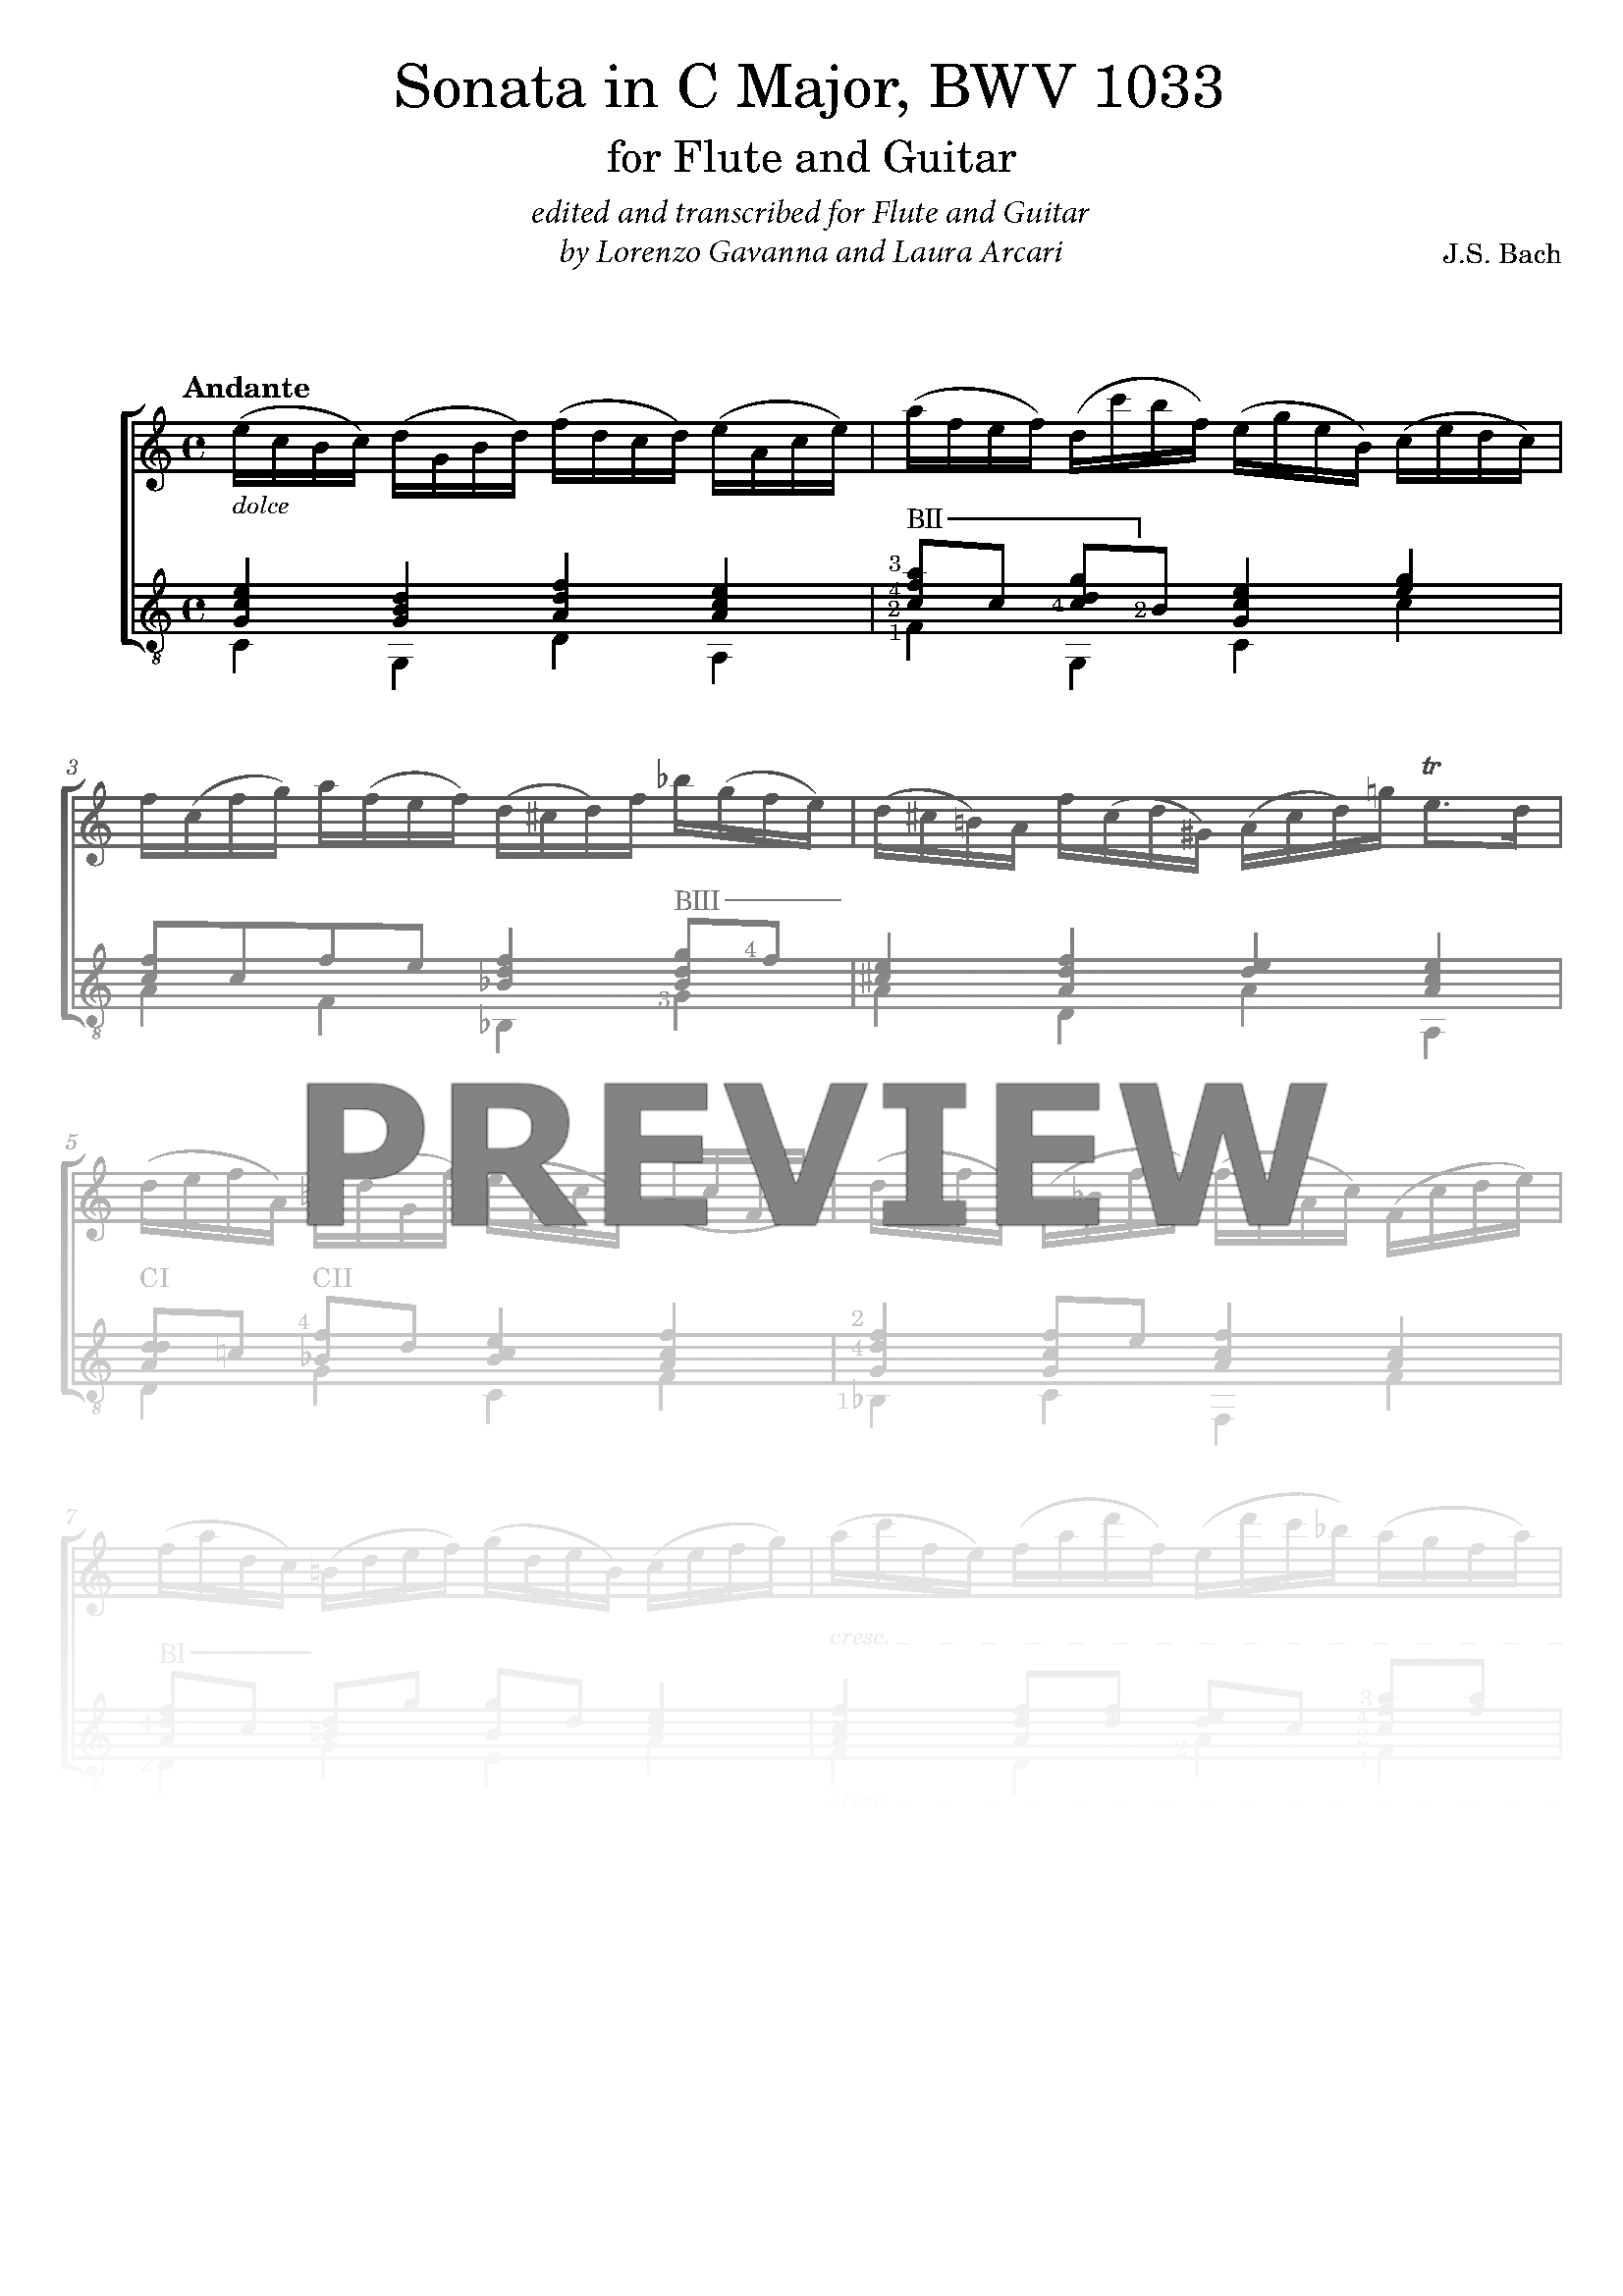 bach1033_cover